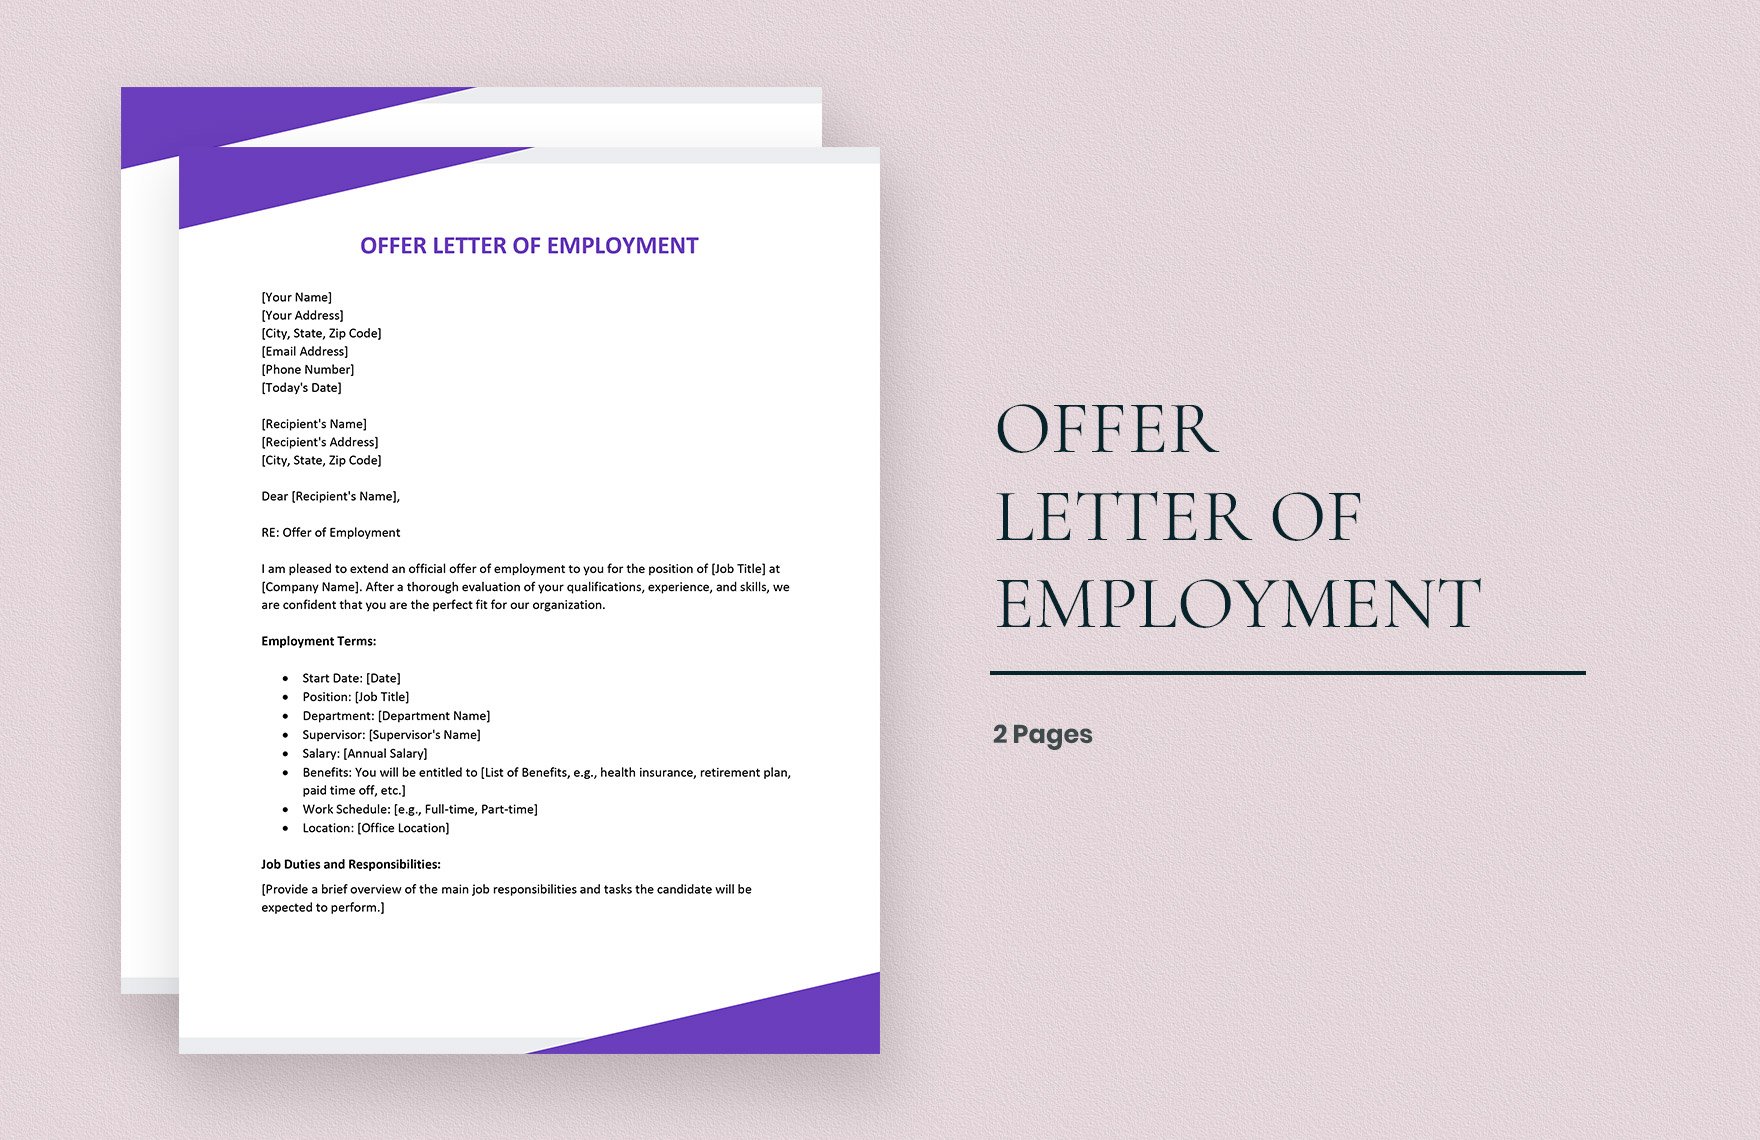 Offer Letter of Employment